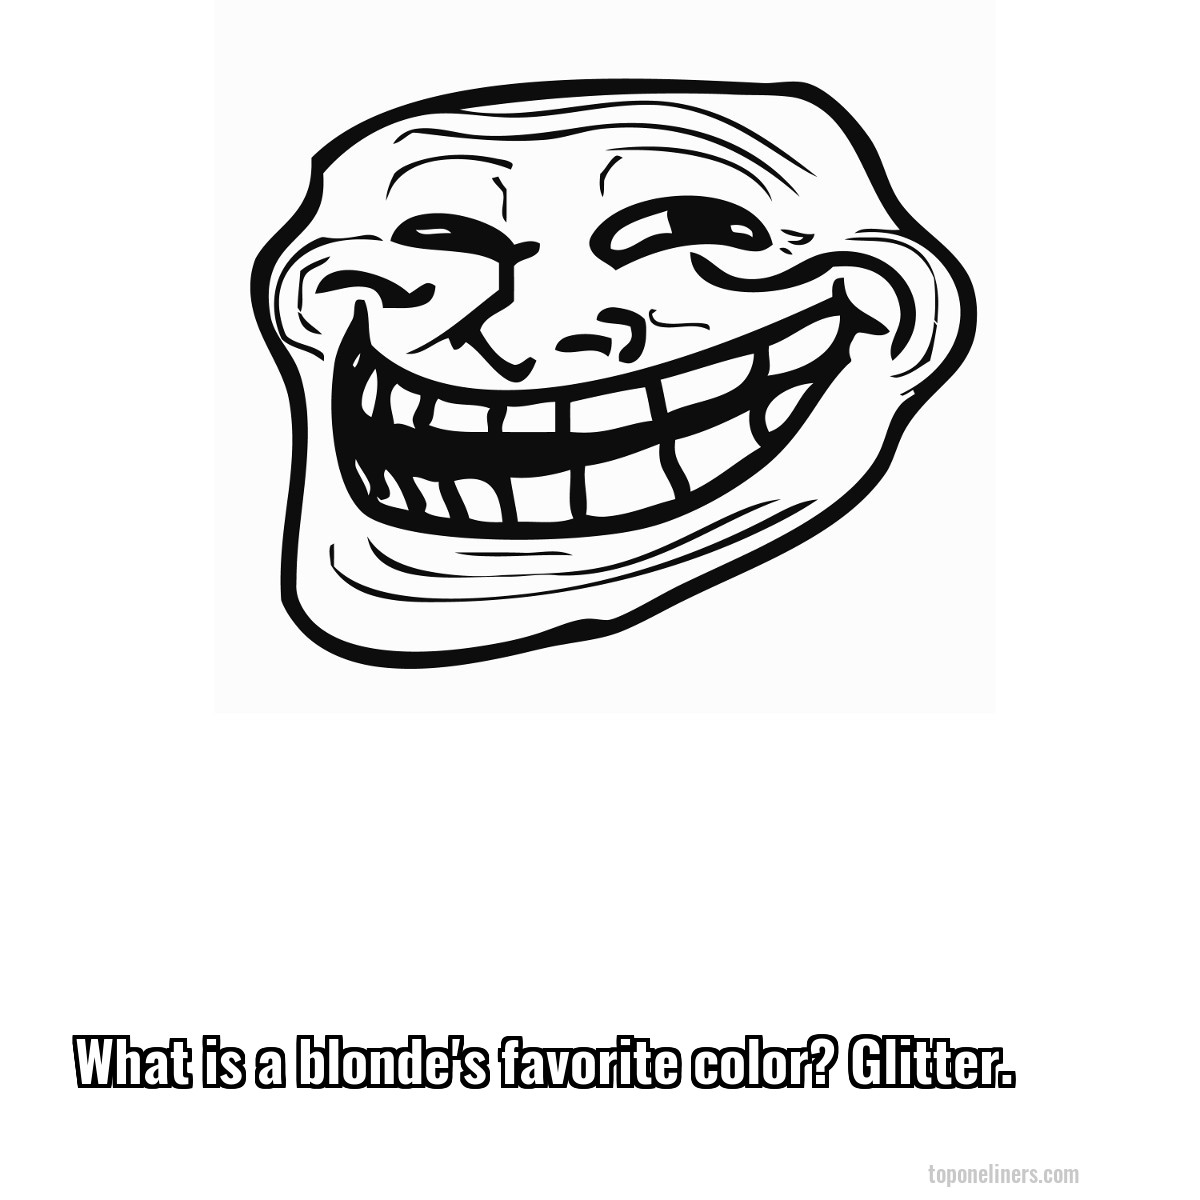 What is a blonde's favorite color? Glitter.